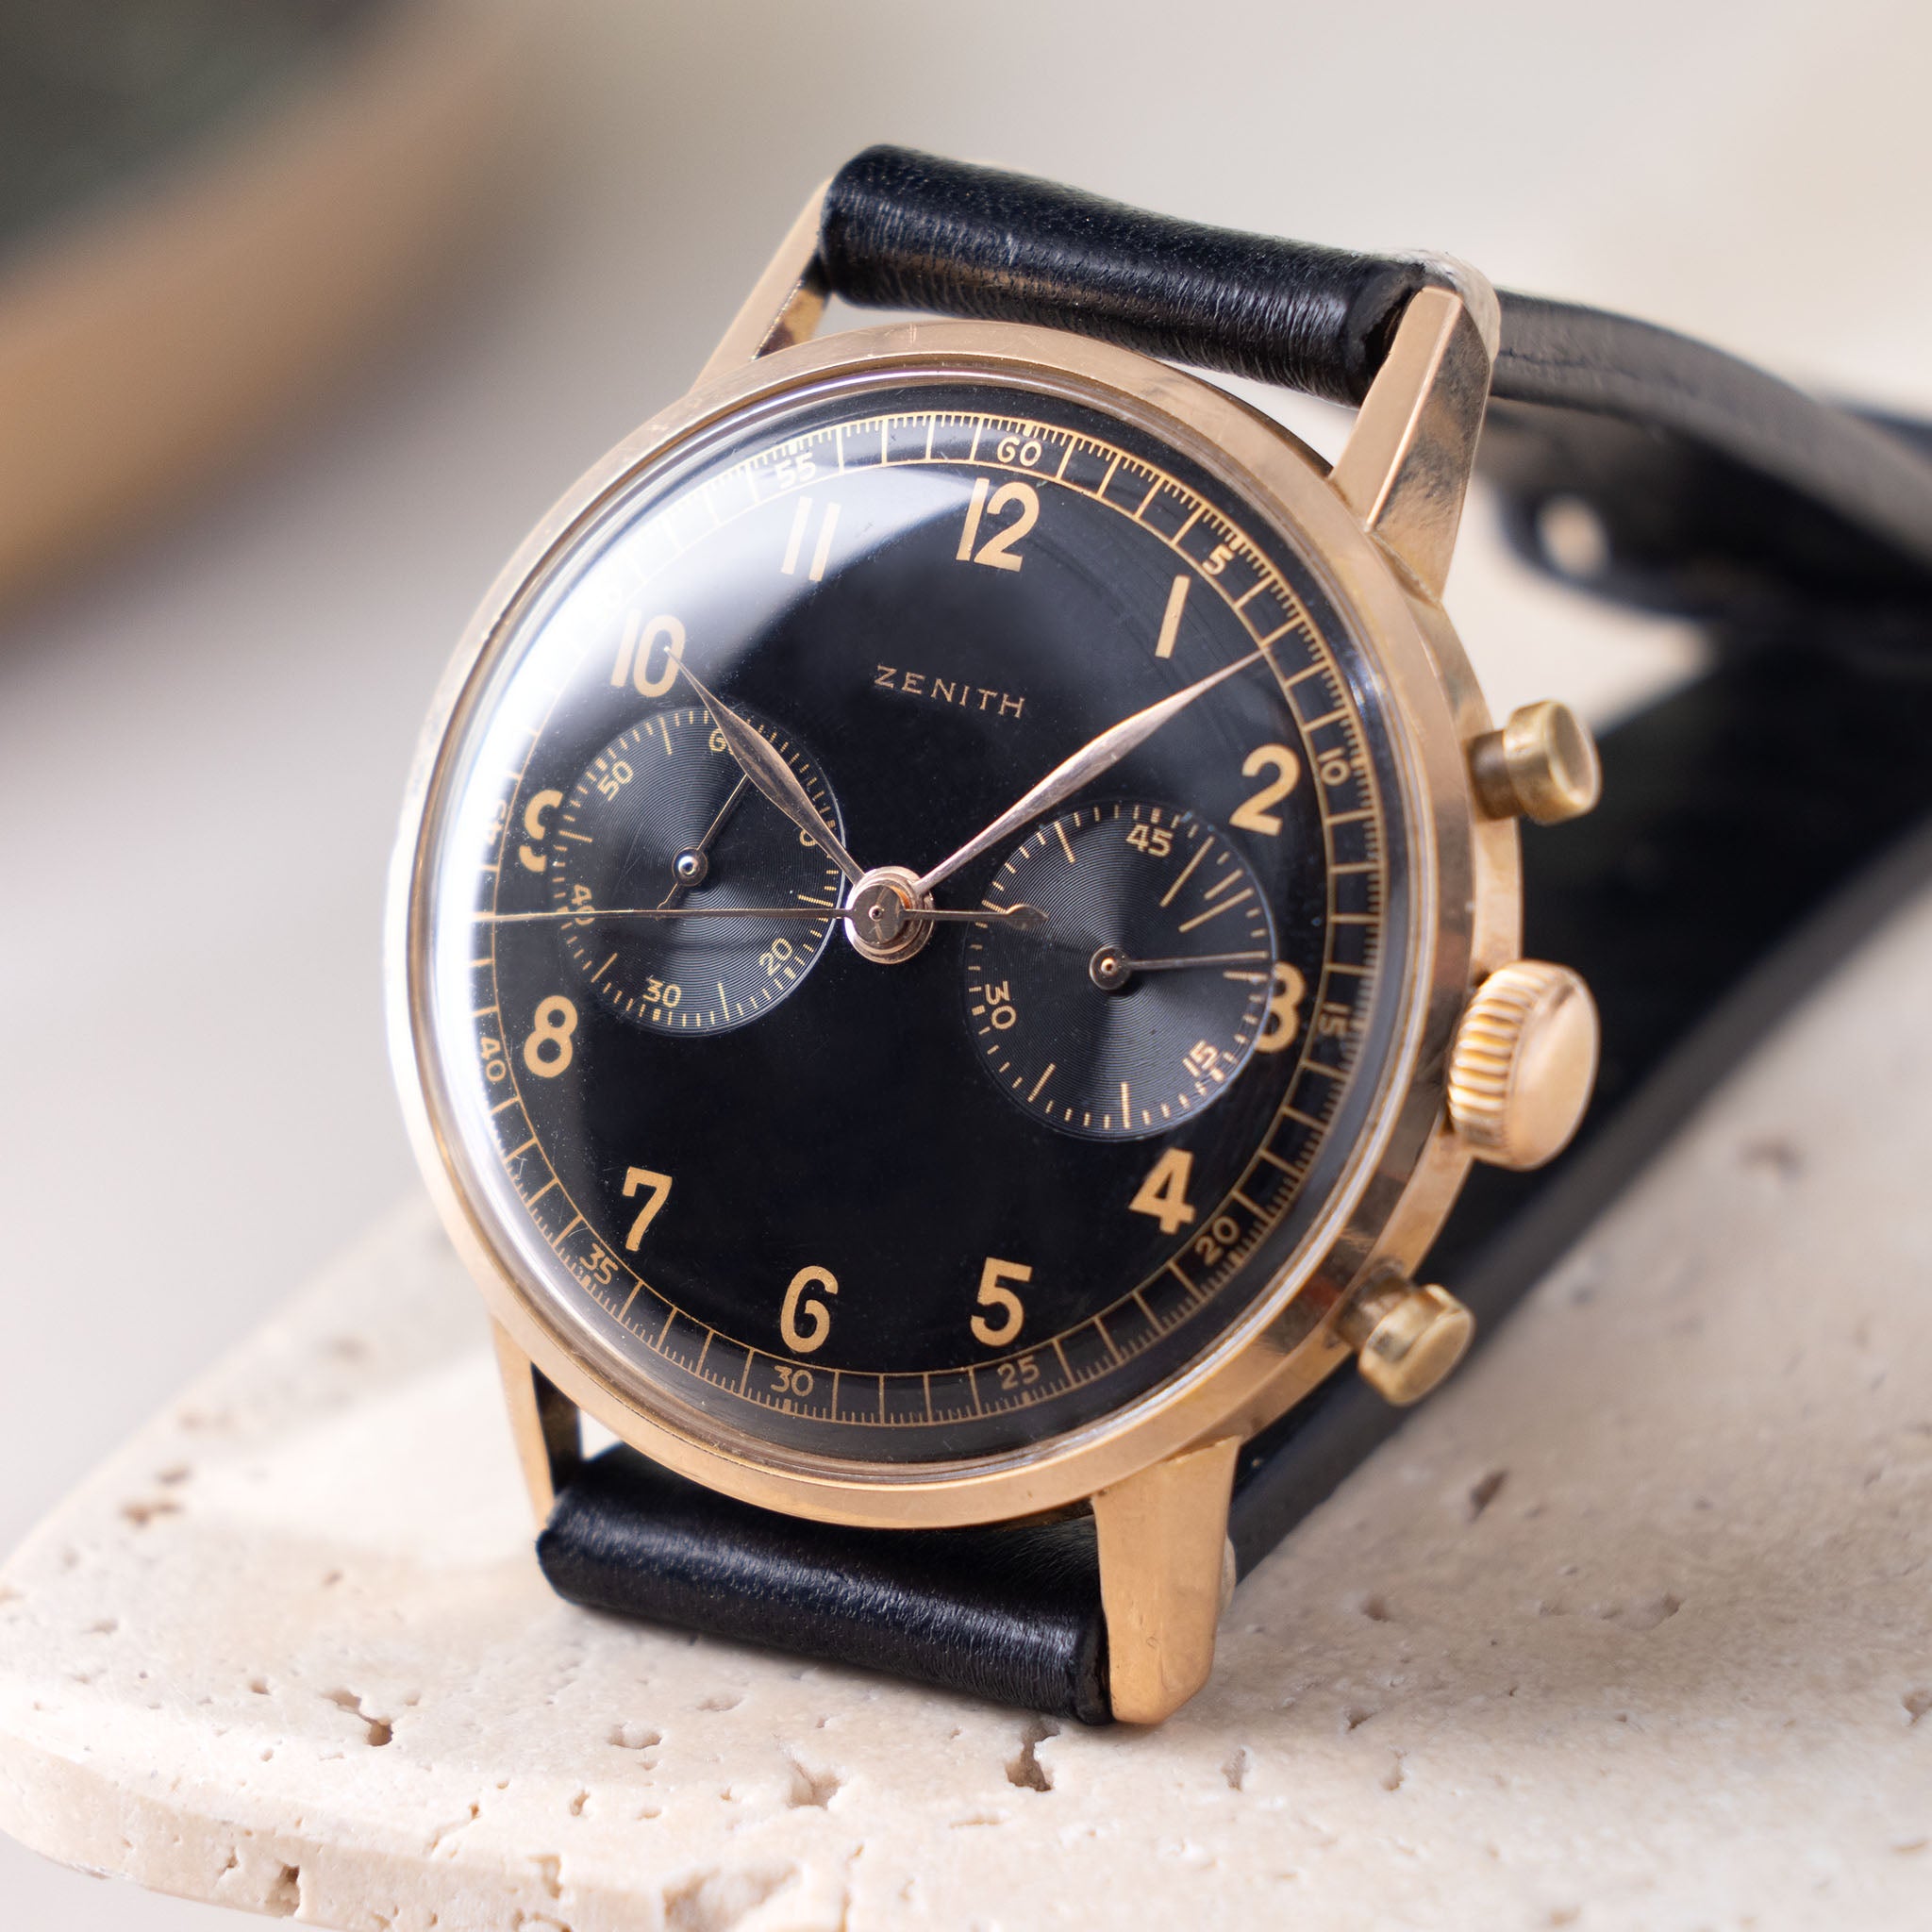 Zenith Chronograph 18k Pink Gold with Military provenance - incoming